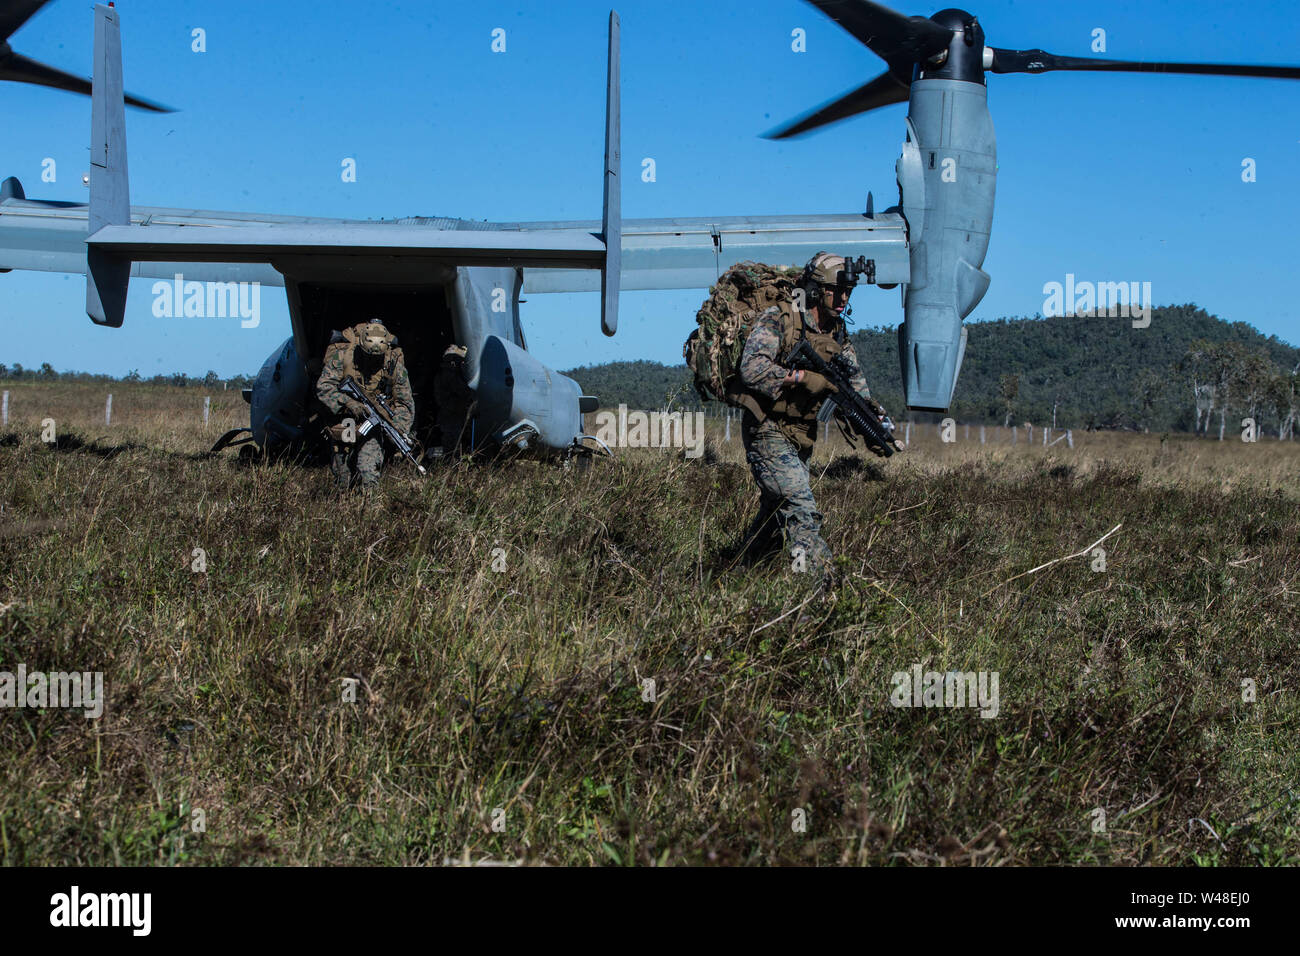 Marines with the 31st Marine Expeditionary Unit’s Amphibious Reconnaissance Platoon disembark an MV-22B Osprey tiltrotor aircraft with Marine Medium Tiltrotor Squadron 265 (Reinforced), 31st MEU, during a reconnaissance and surveillance insert into Stanage Bay Training Area, Queensland, Australia, July 19, 2019. The 31st MEU is currently participating in Talisman Saber 2019 off the coast of Northern Australia. A bilateral, biennial event, Talisman Sabre is designed to improve U.S. and Australian combat training, readiness, and interoperability through realistic, relevant training necessary to Stock Photo